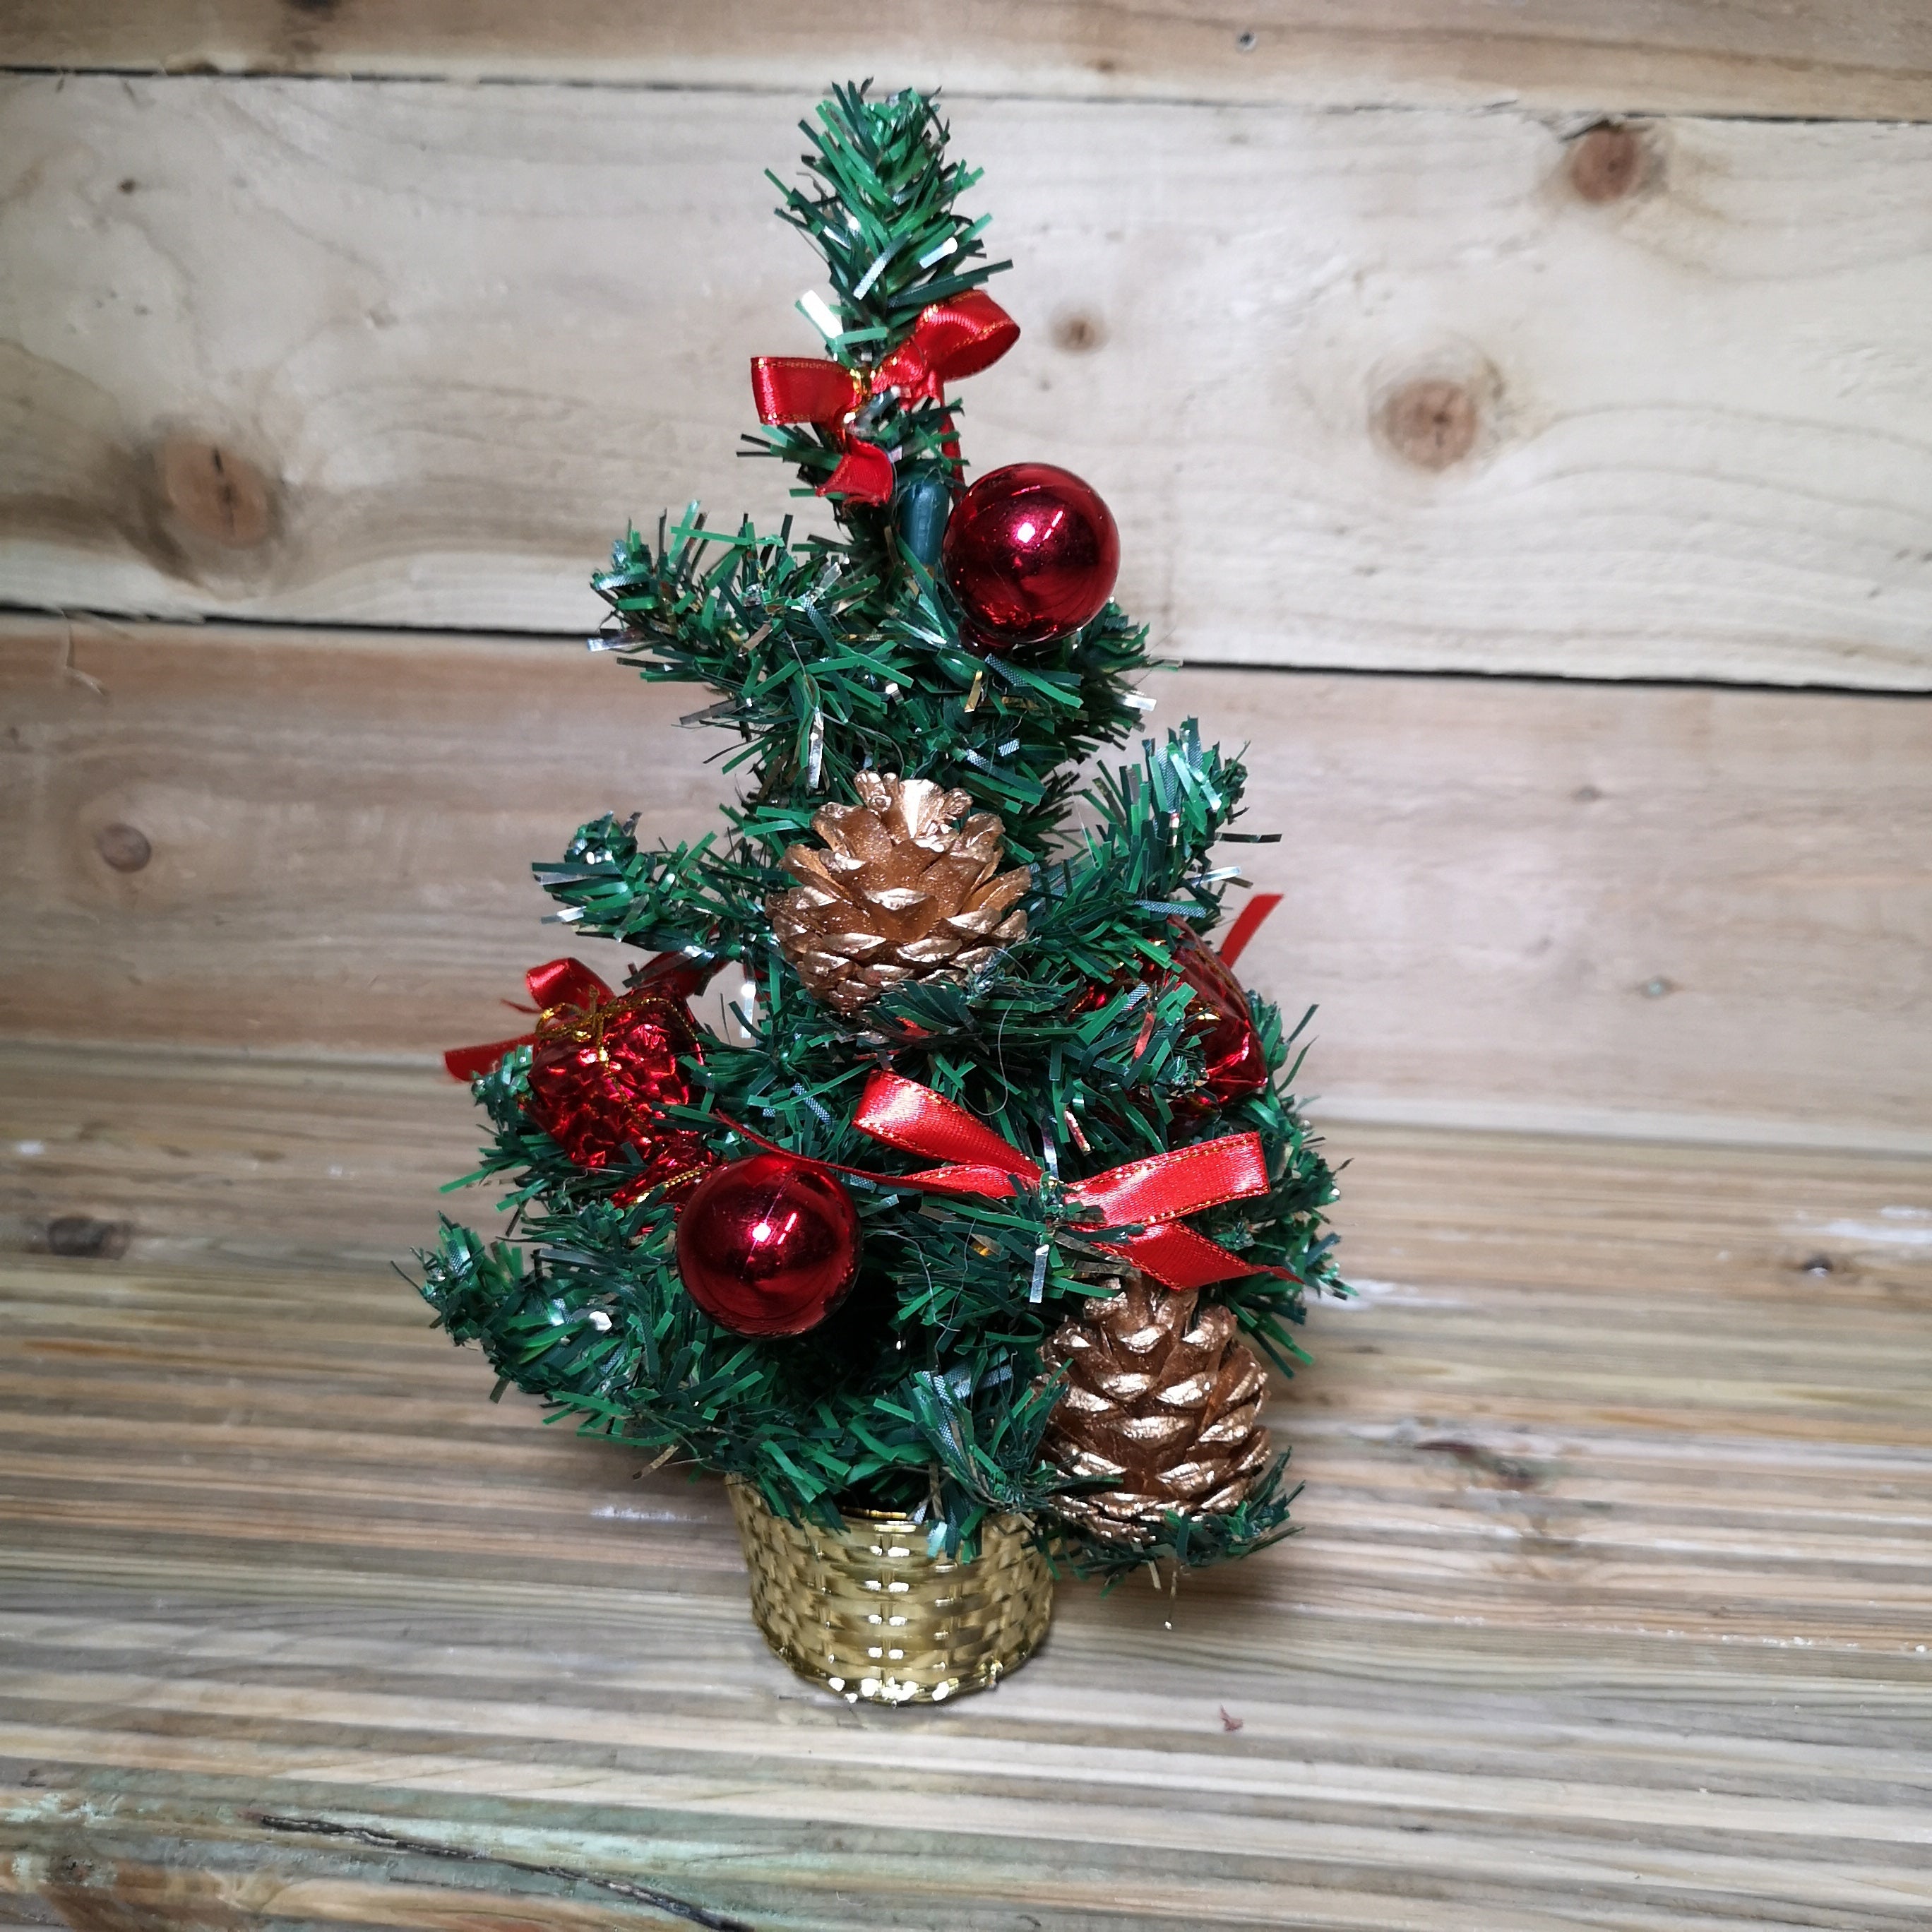 30cm Premier Green Mini Christmas Tree Decorated in Red & Gold